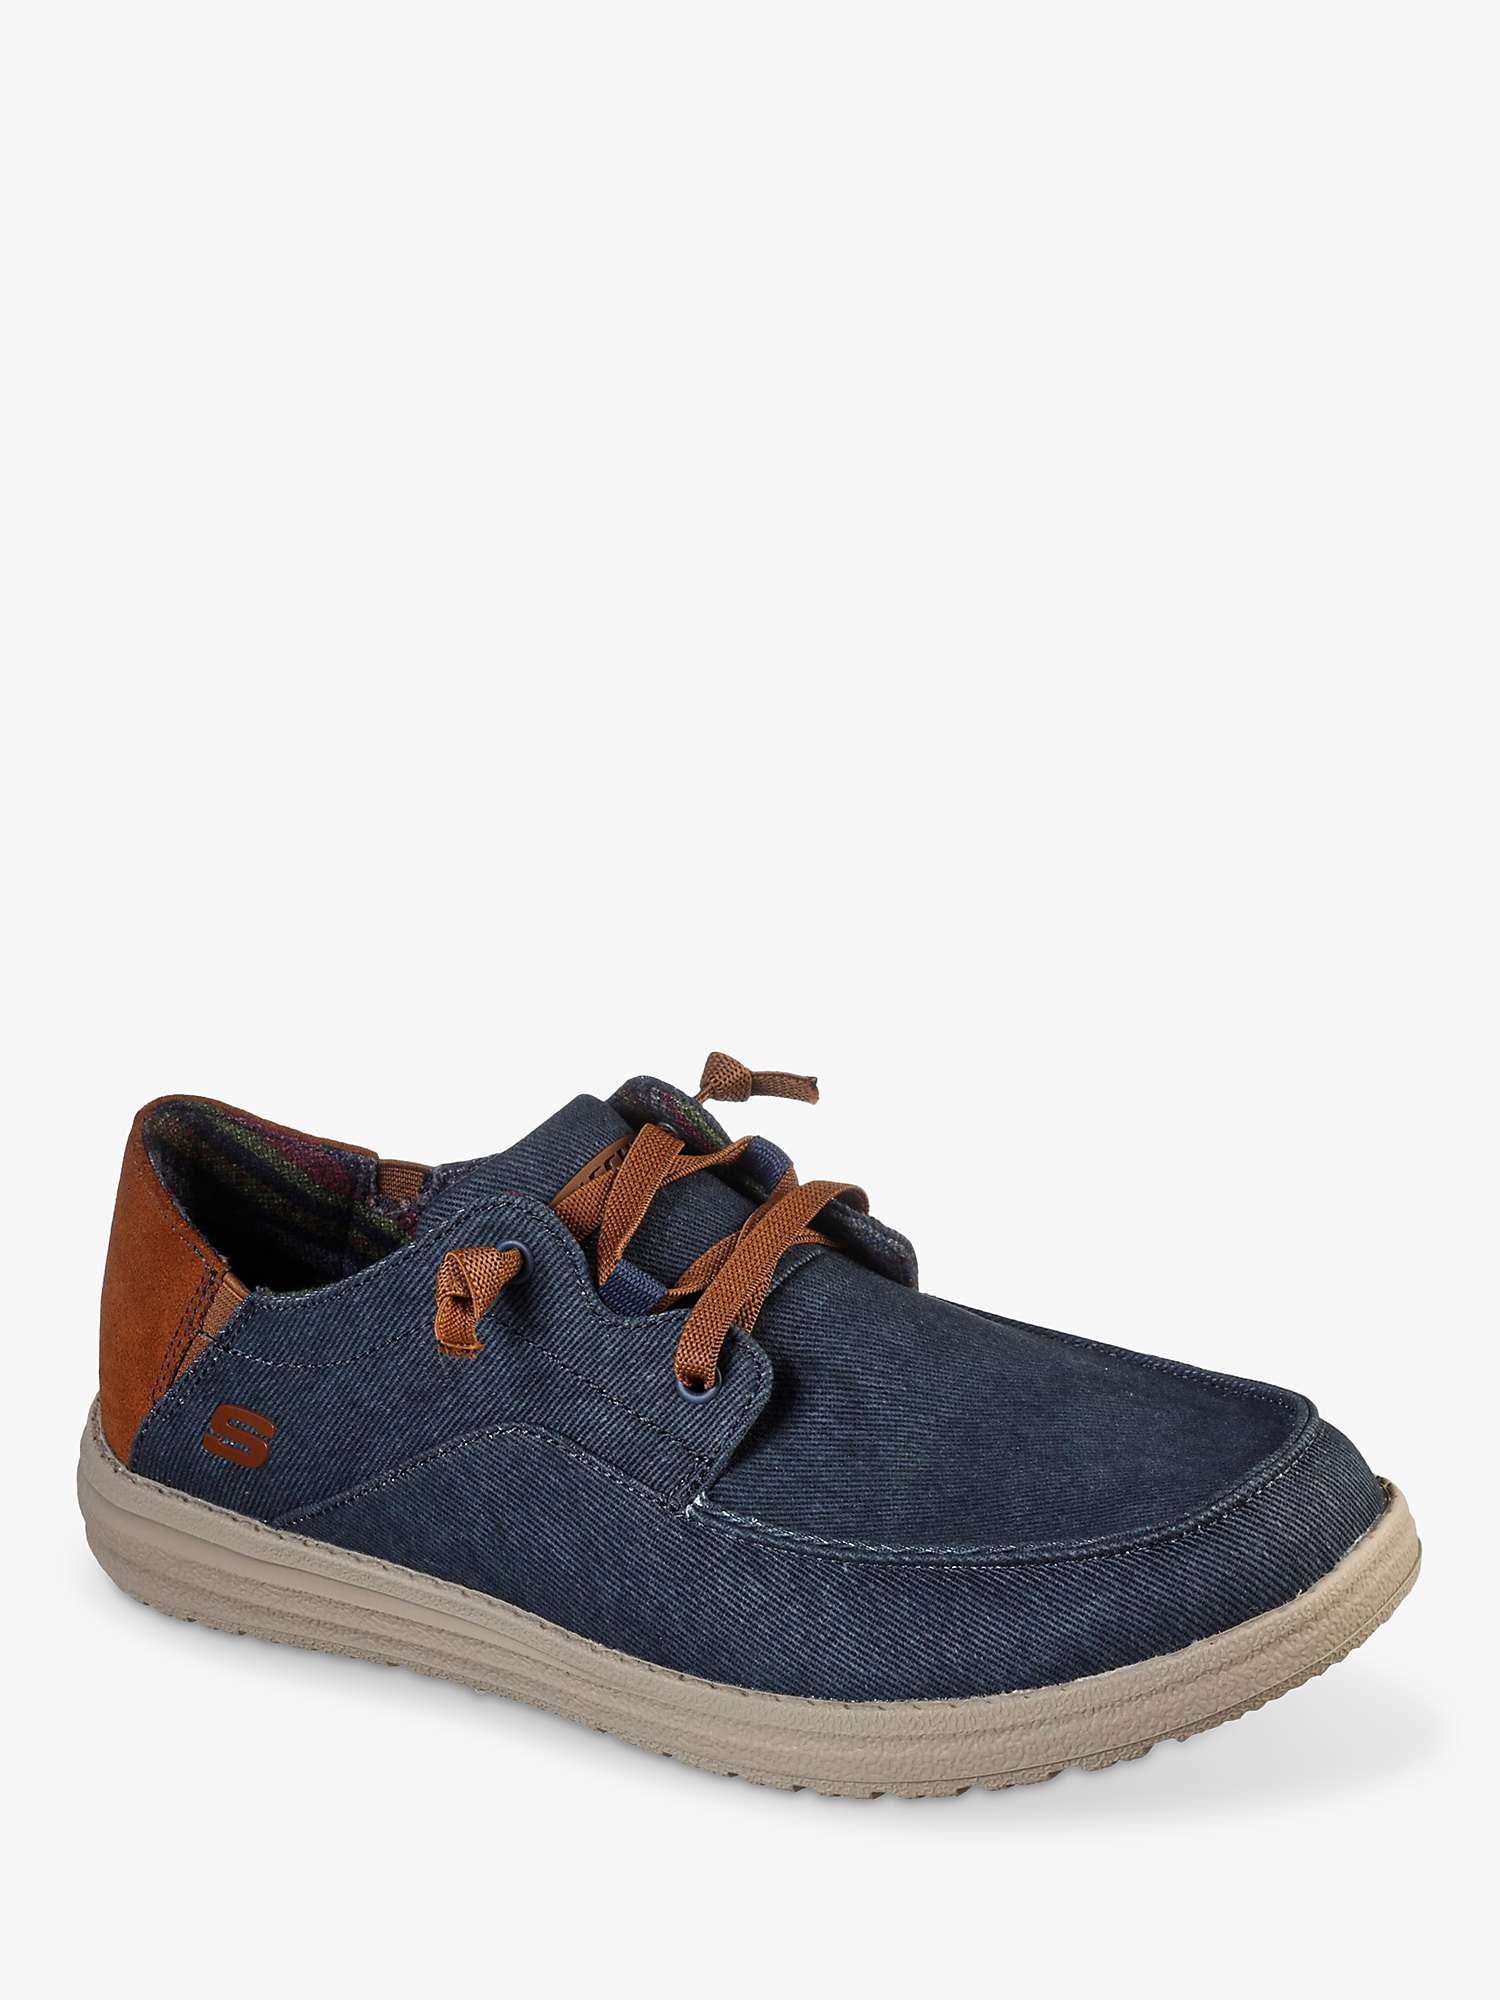 Buy Skechers Melson Planon Lace Up Trainers, Navy Online at johnlewis.com